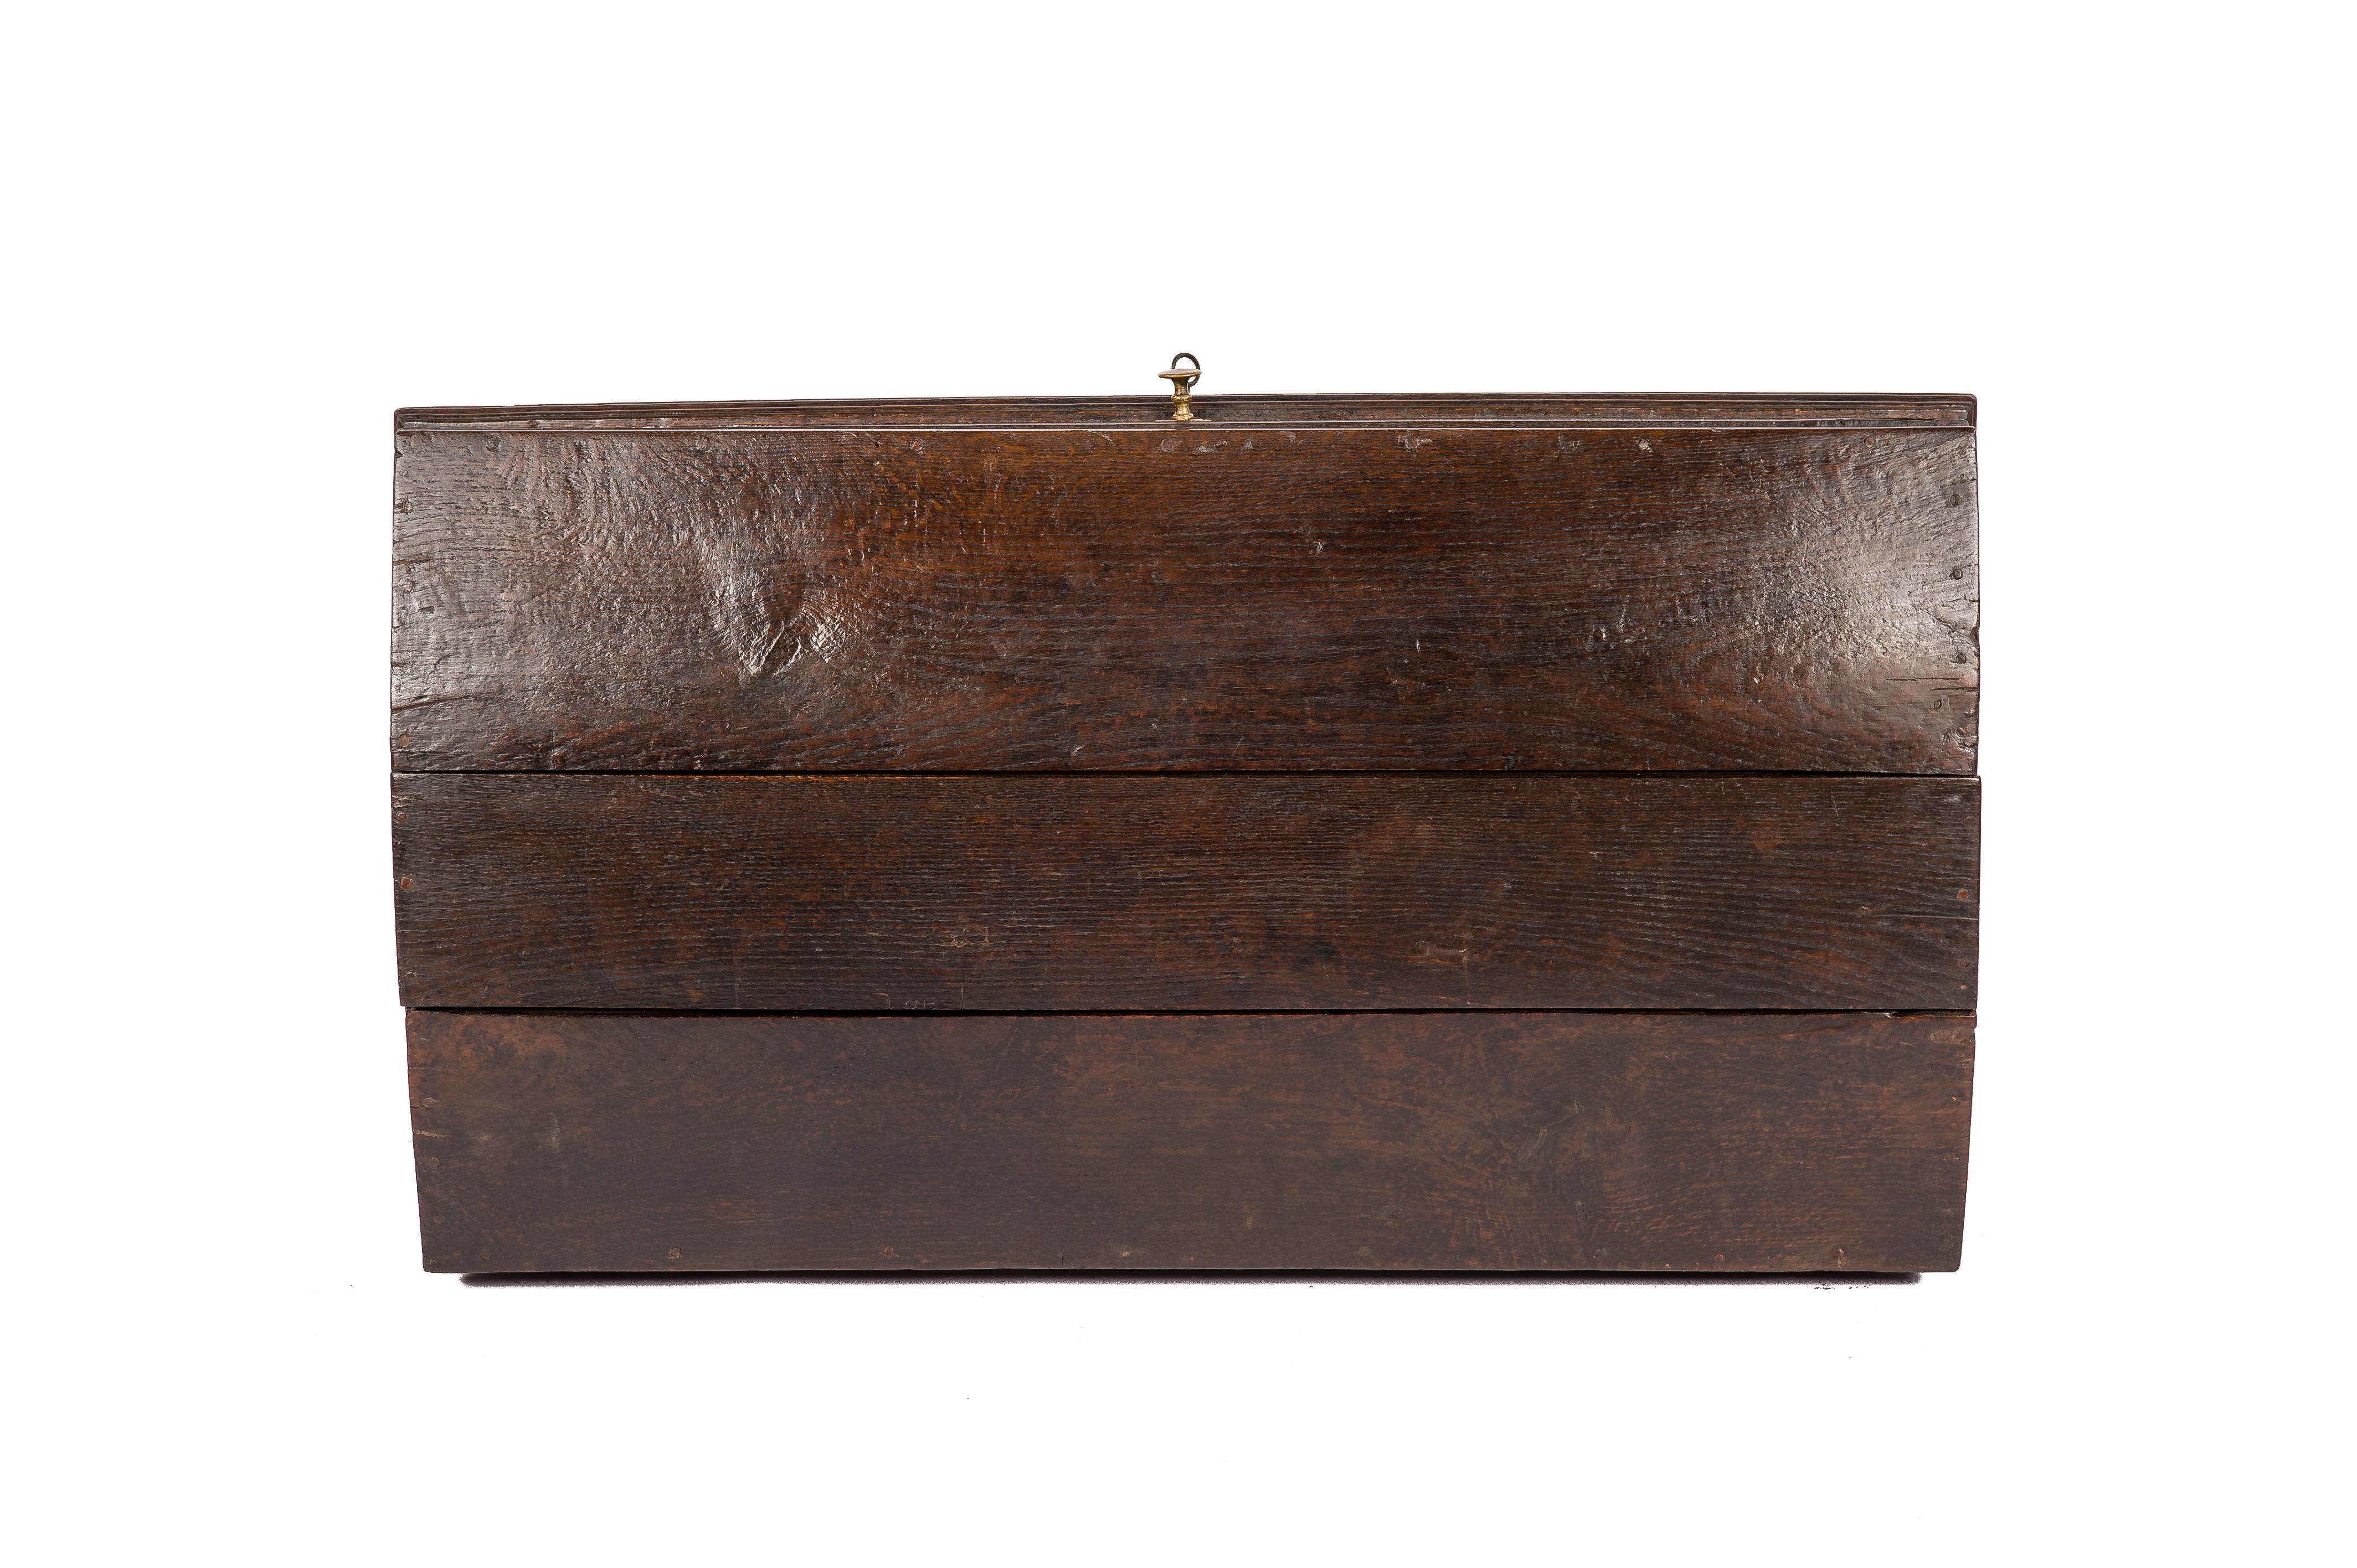 Brass Antique 19th Century German Solid Oak Dome Top Chest Trunk Coffer Box For Sale